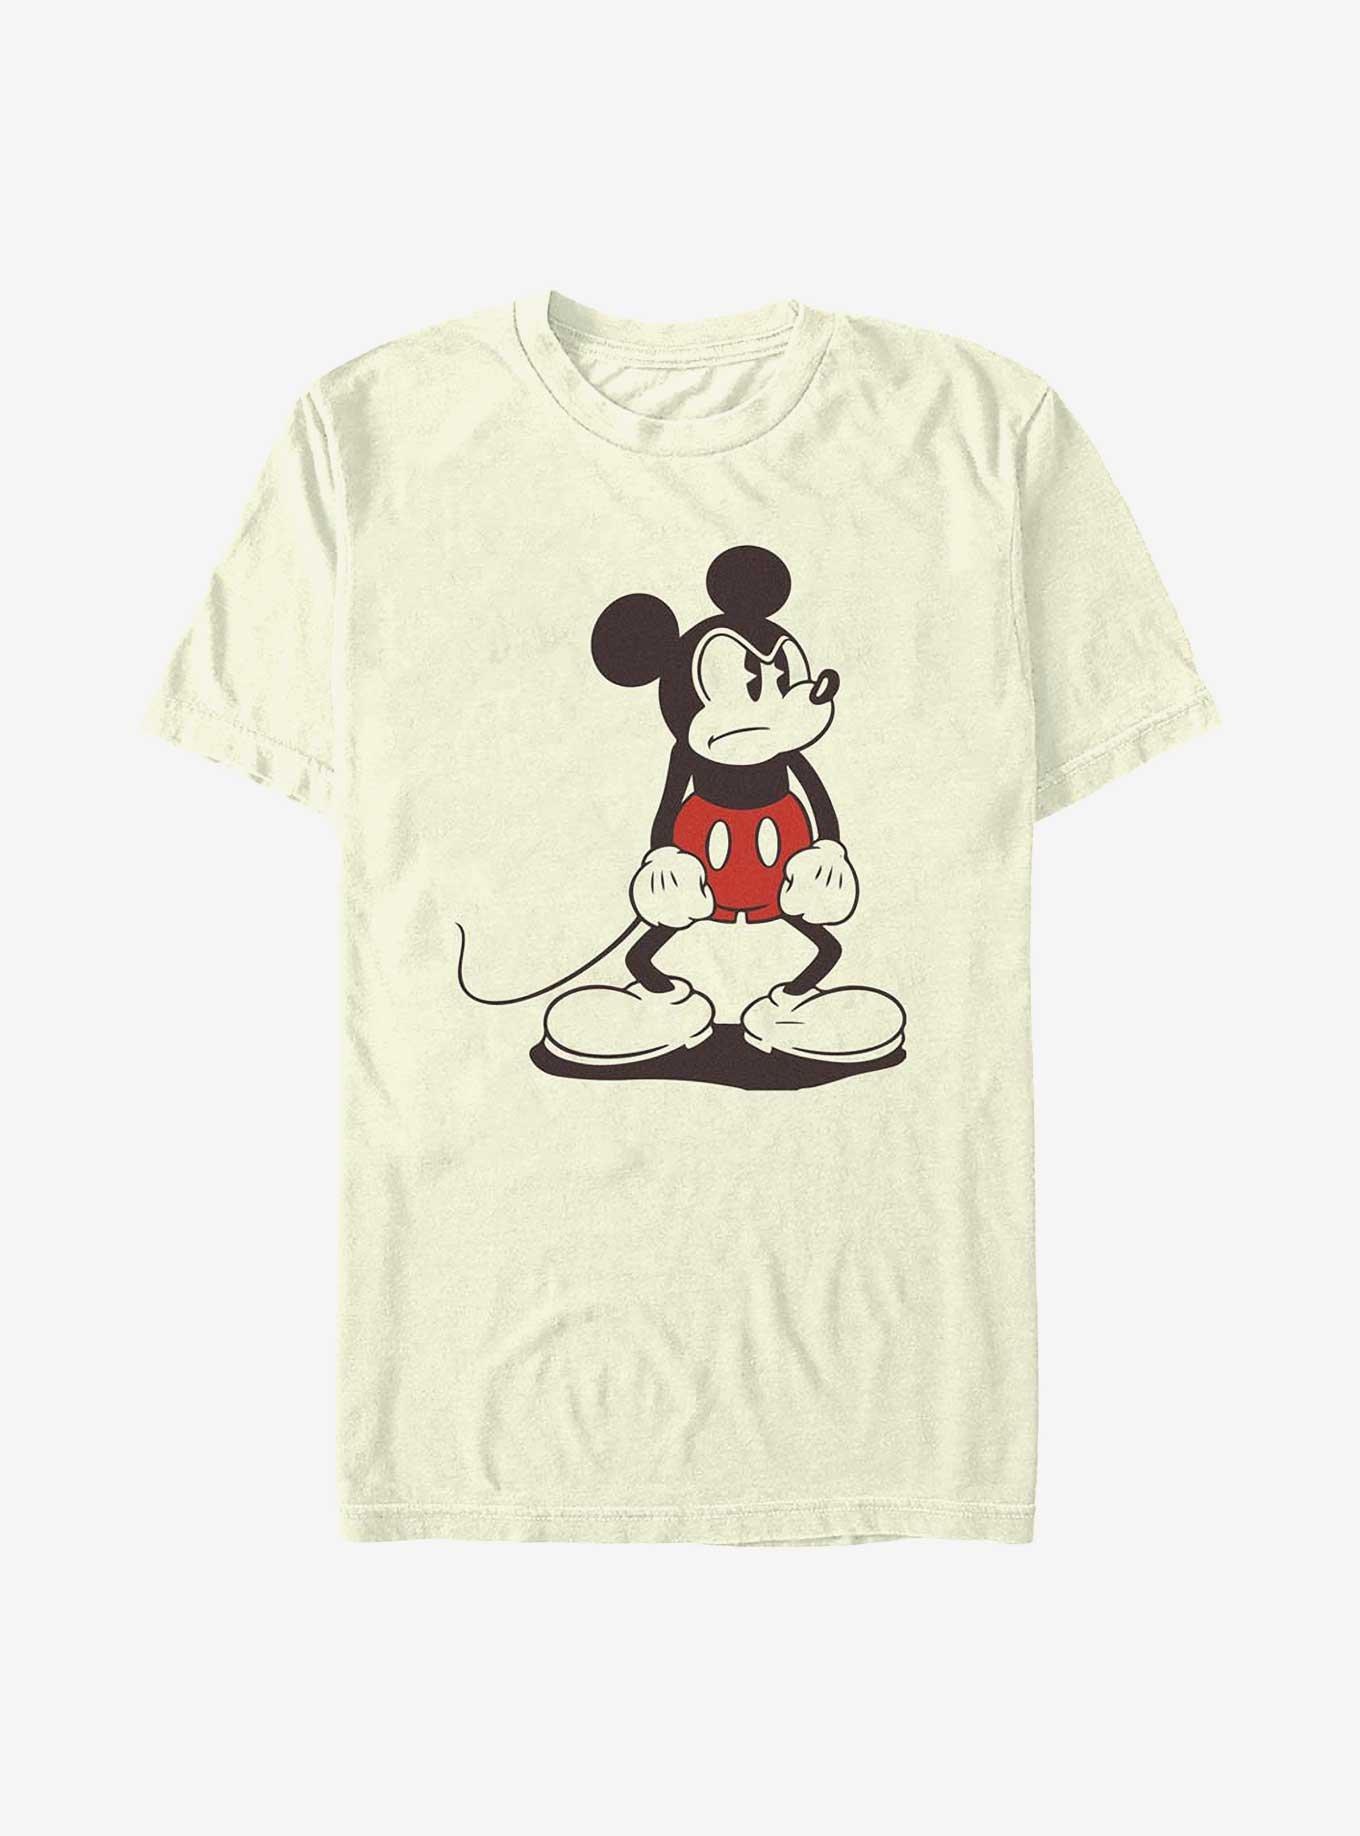 OFFICIAL Disney Shirts & Graphic Tees - Hot Topic